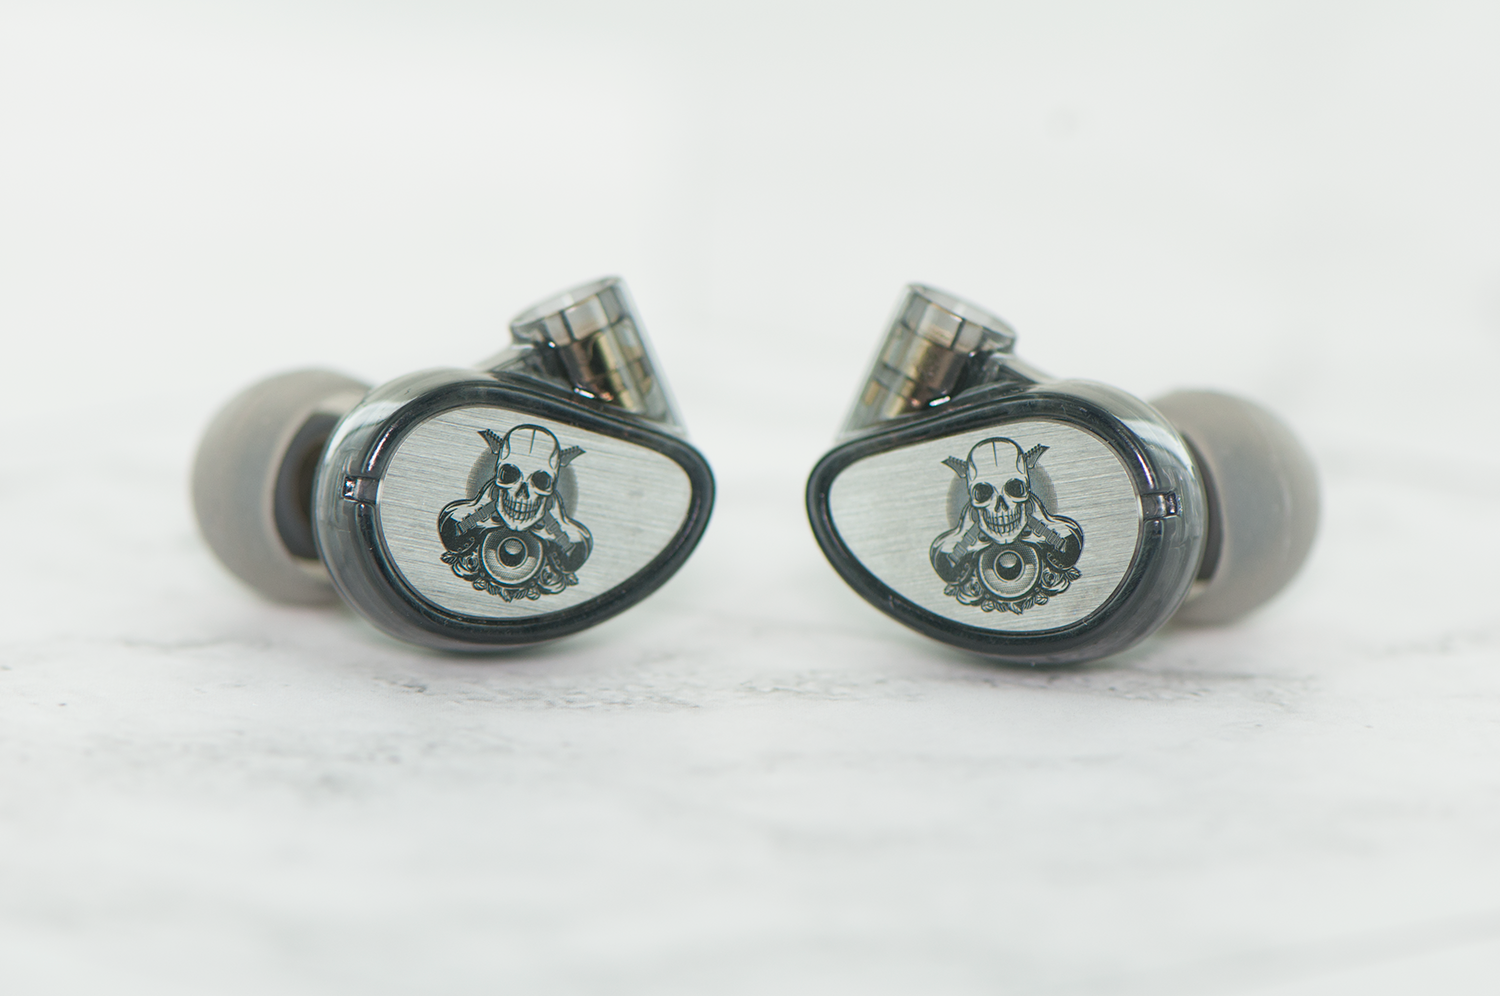 Two high-end in-ear monitors with a skull design on a transparent casing, placed on a white surface.